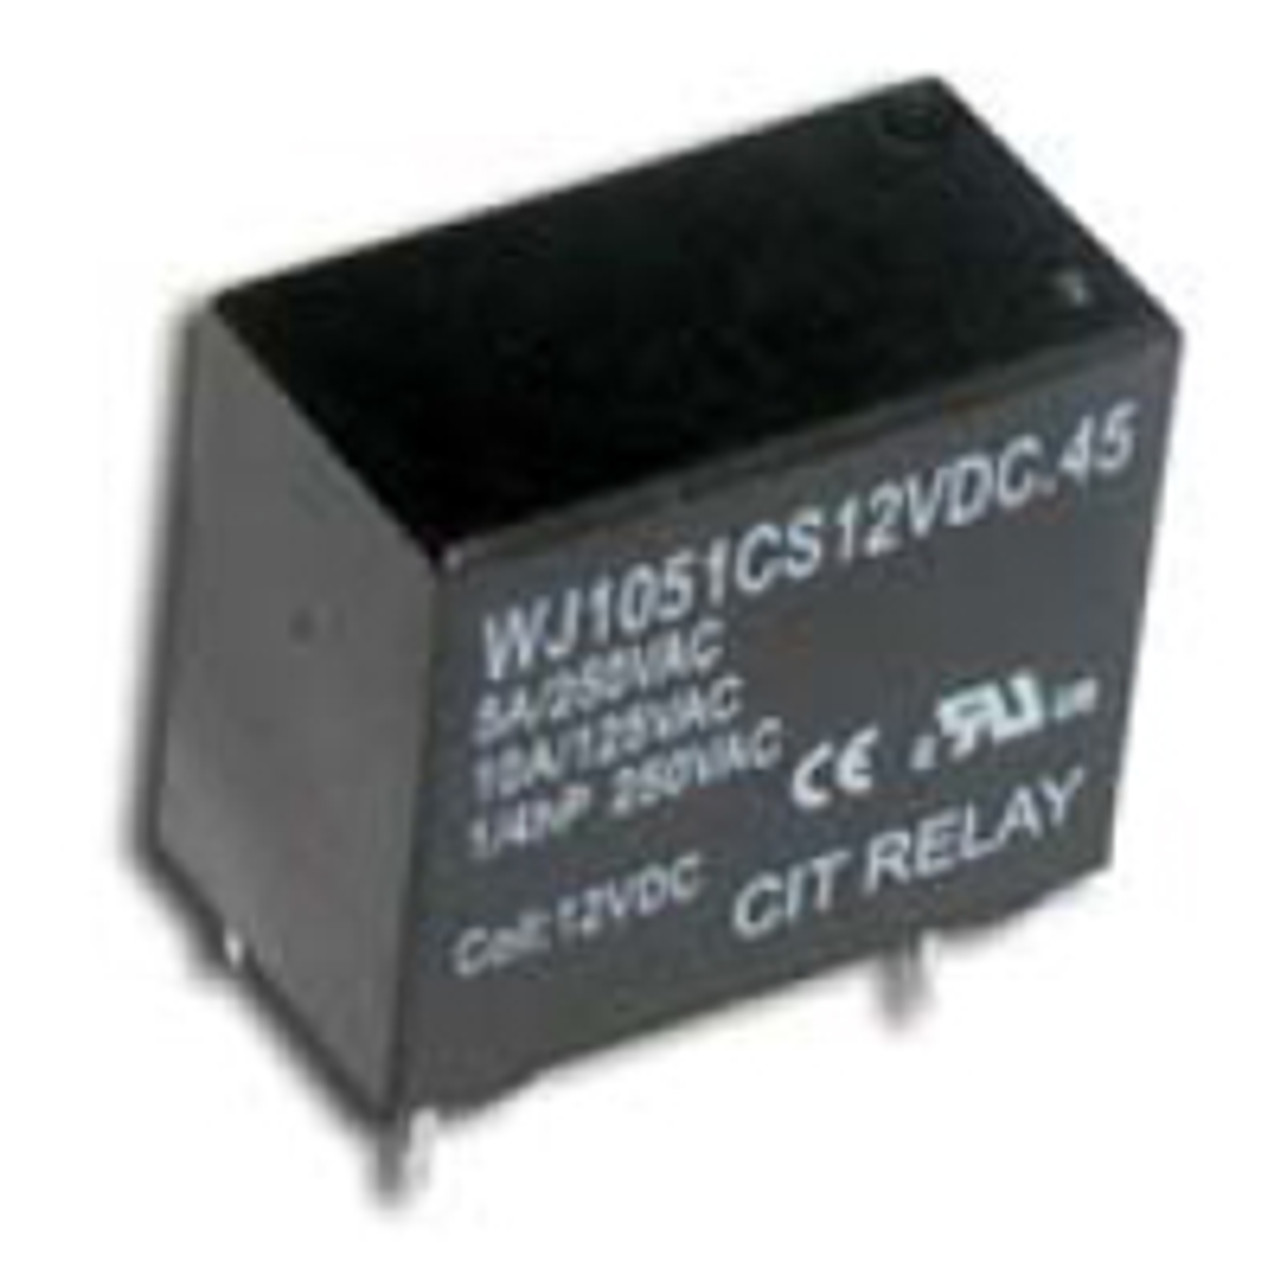 CIT Relay and Switch J1051A5VDC.45 General Purpose Relays